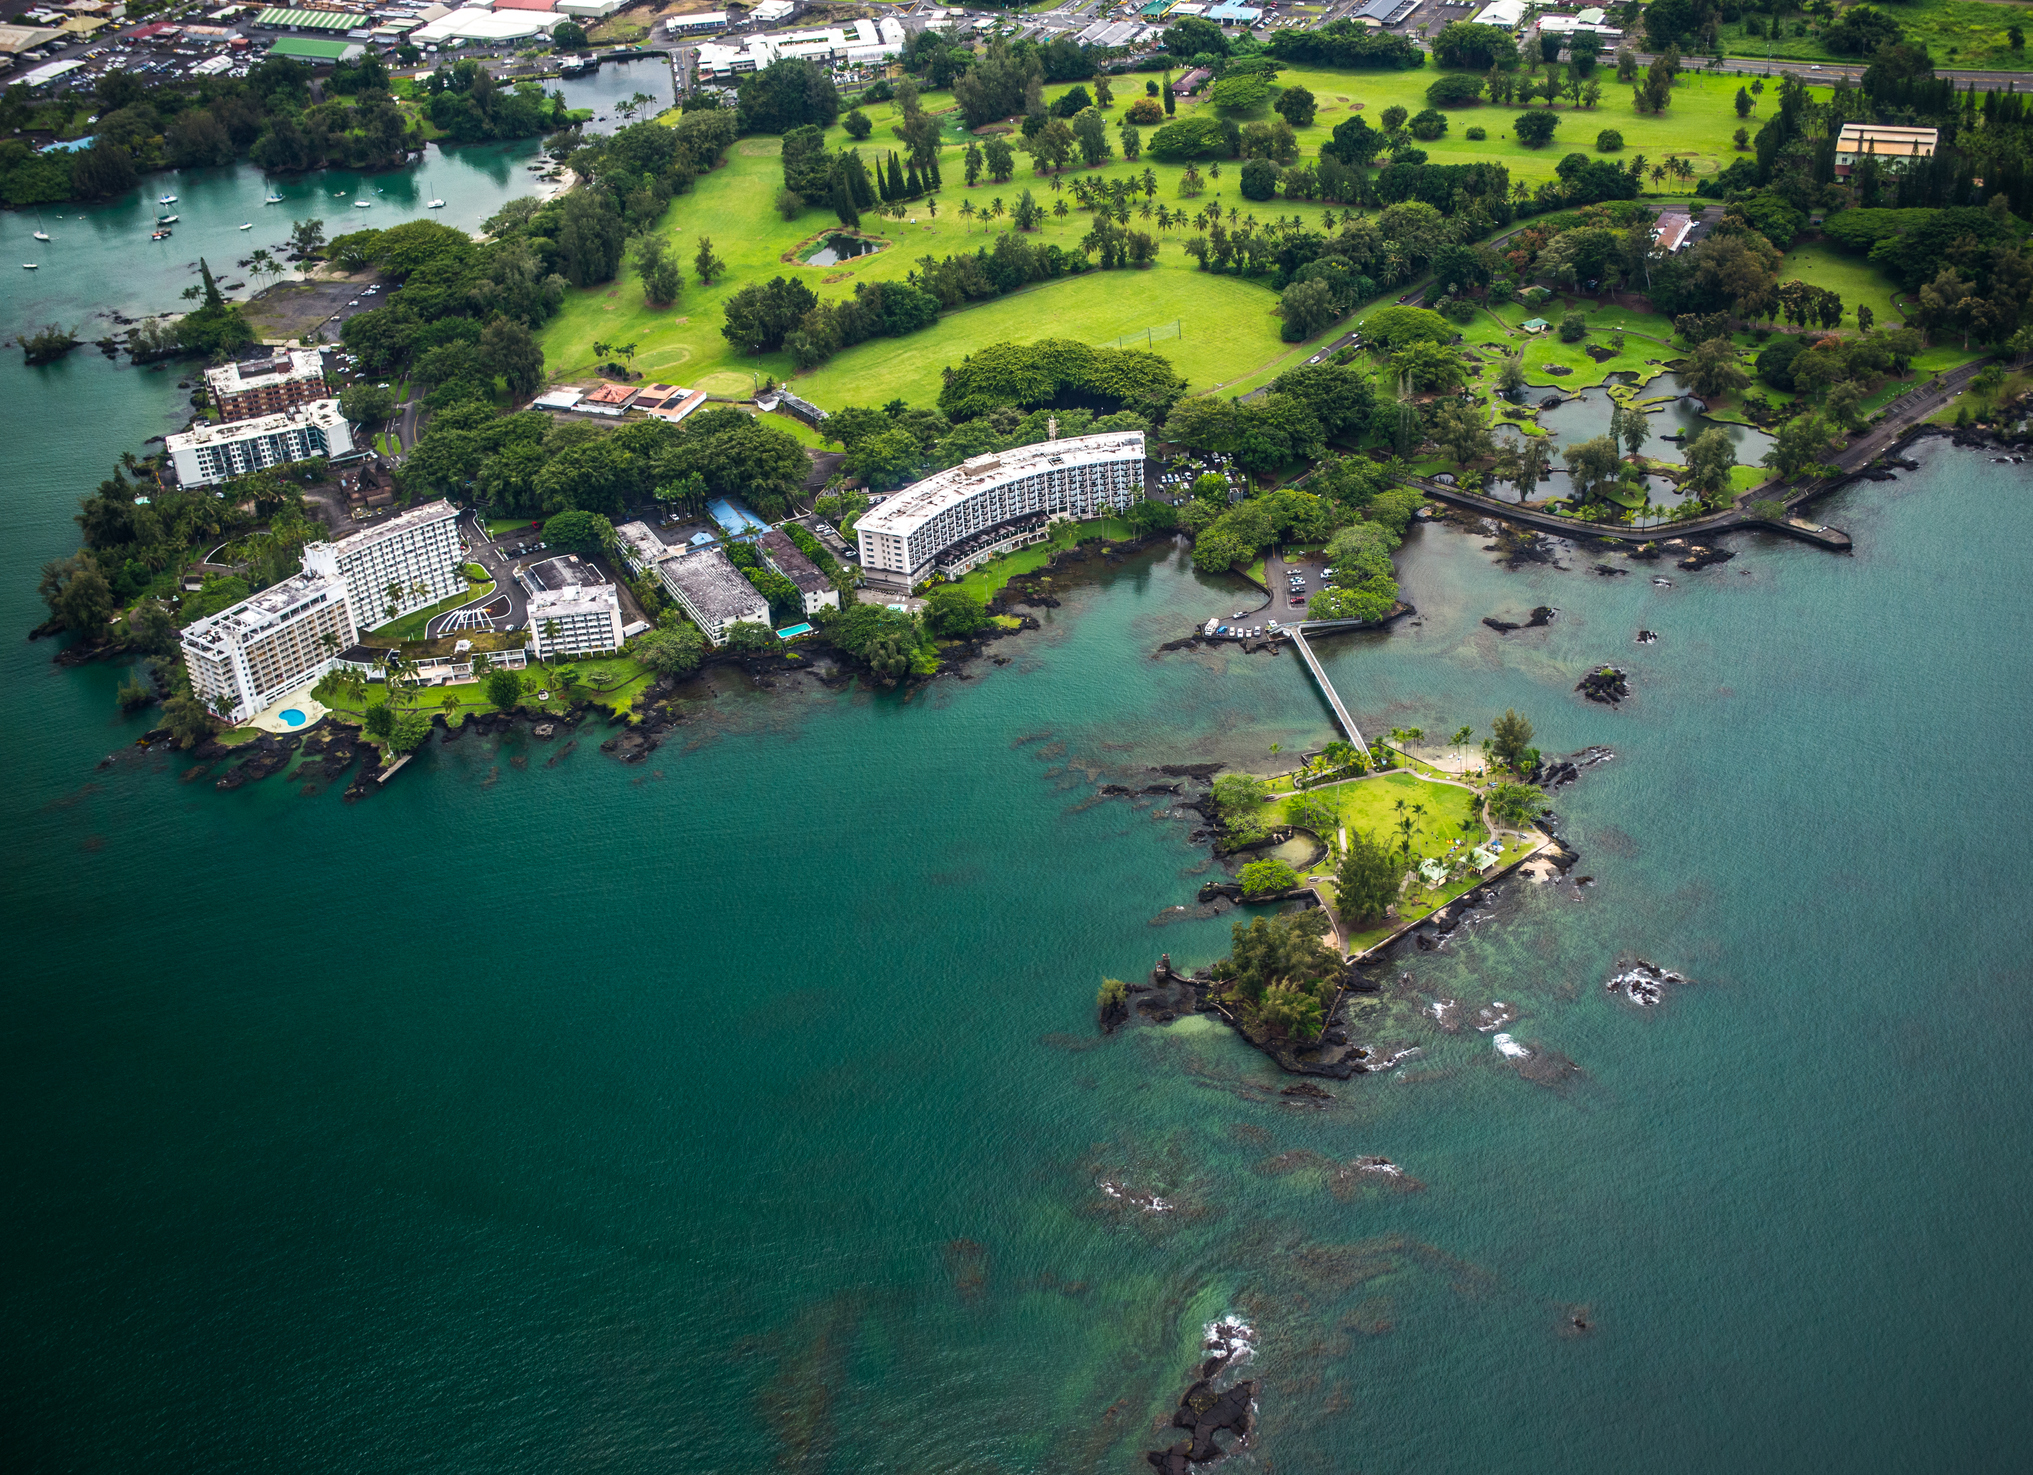 Hilo: The Little Town That Could - Beyond Honolulu